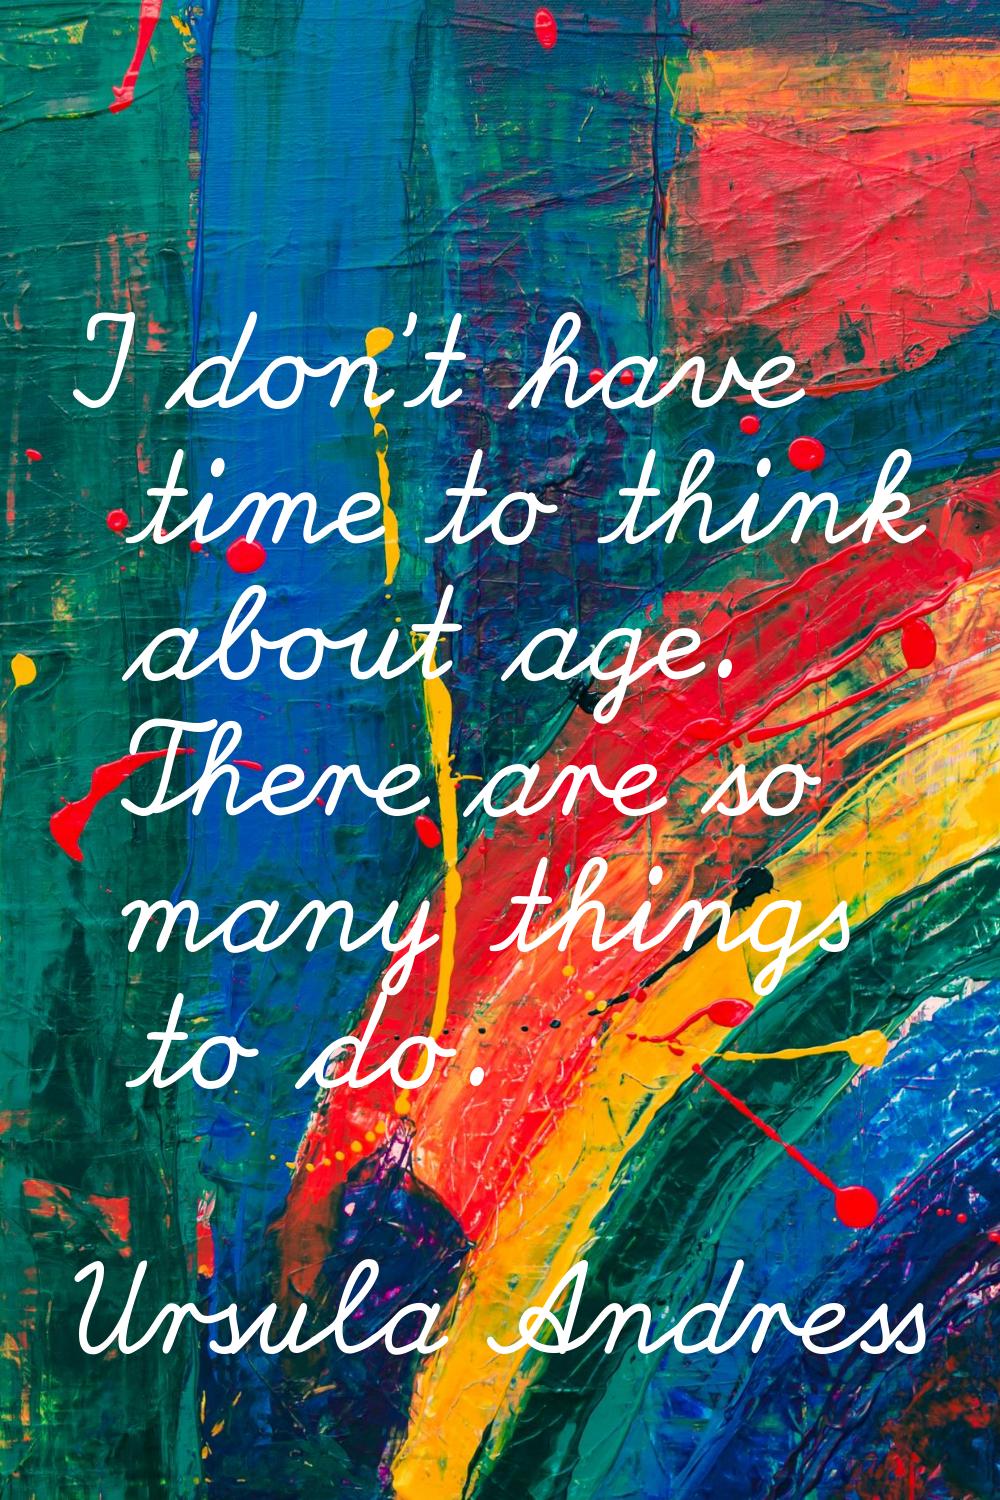 I don't have time to think about age. There are so many things to do.